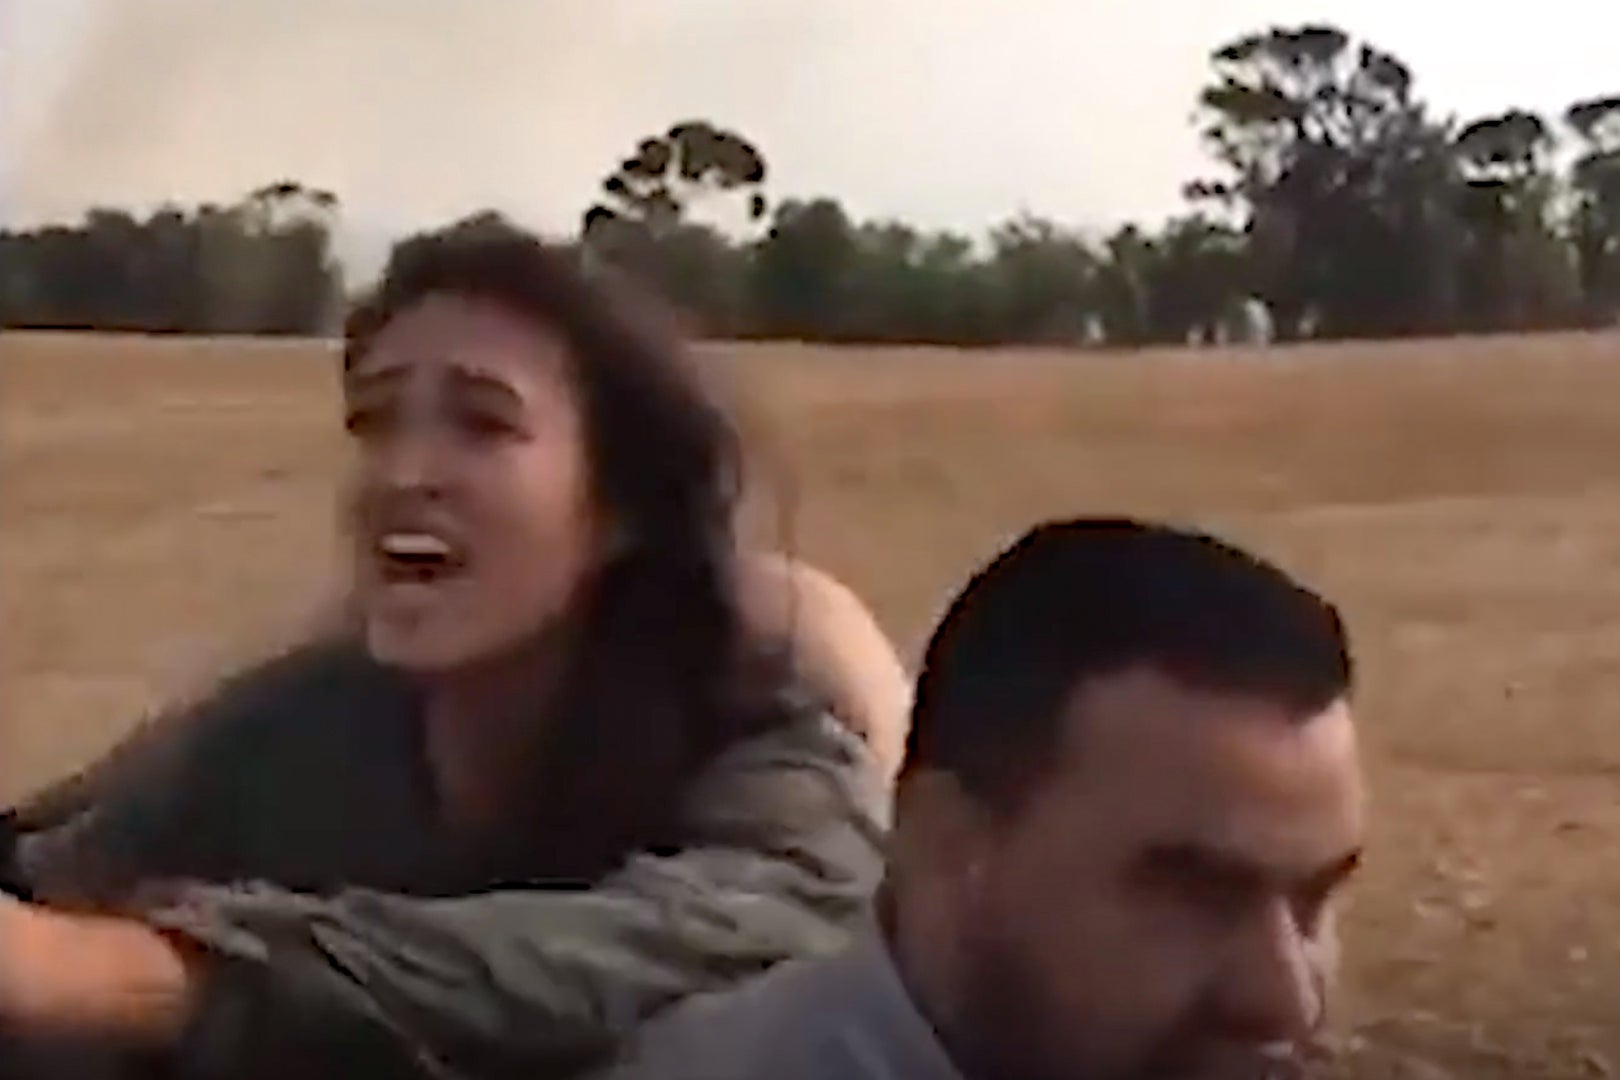 Noa Argamani appeared in a chilling video being abducted by Hamas militants as she rode with her boyfriend on a motorcycle